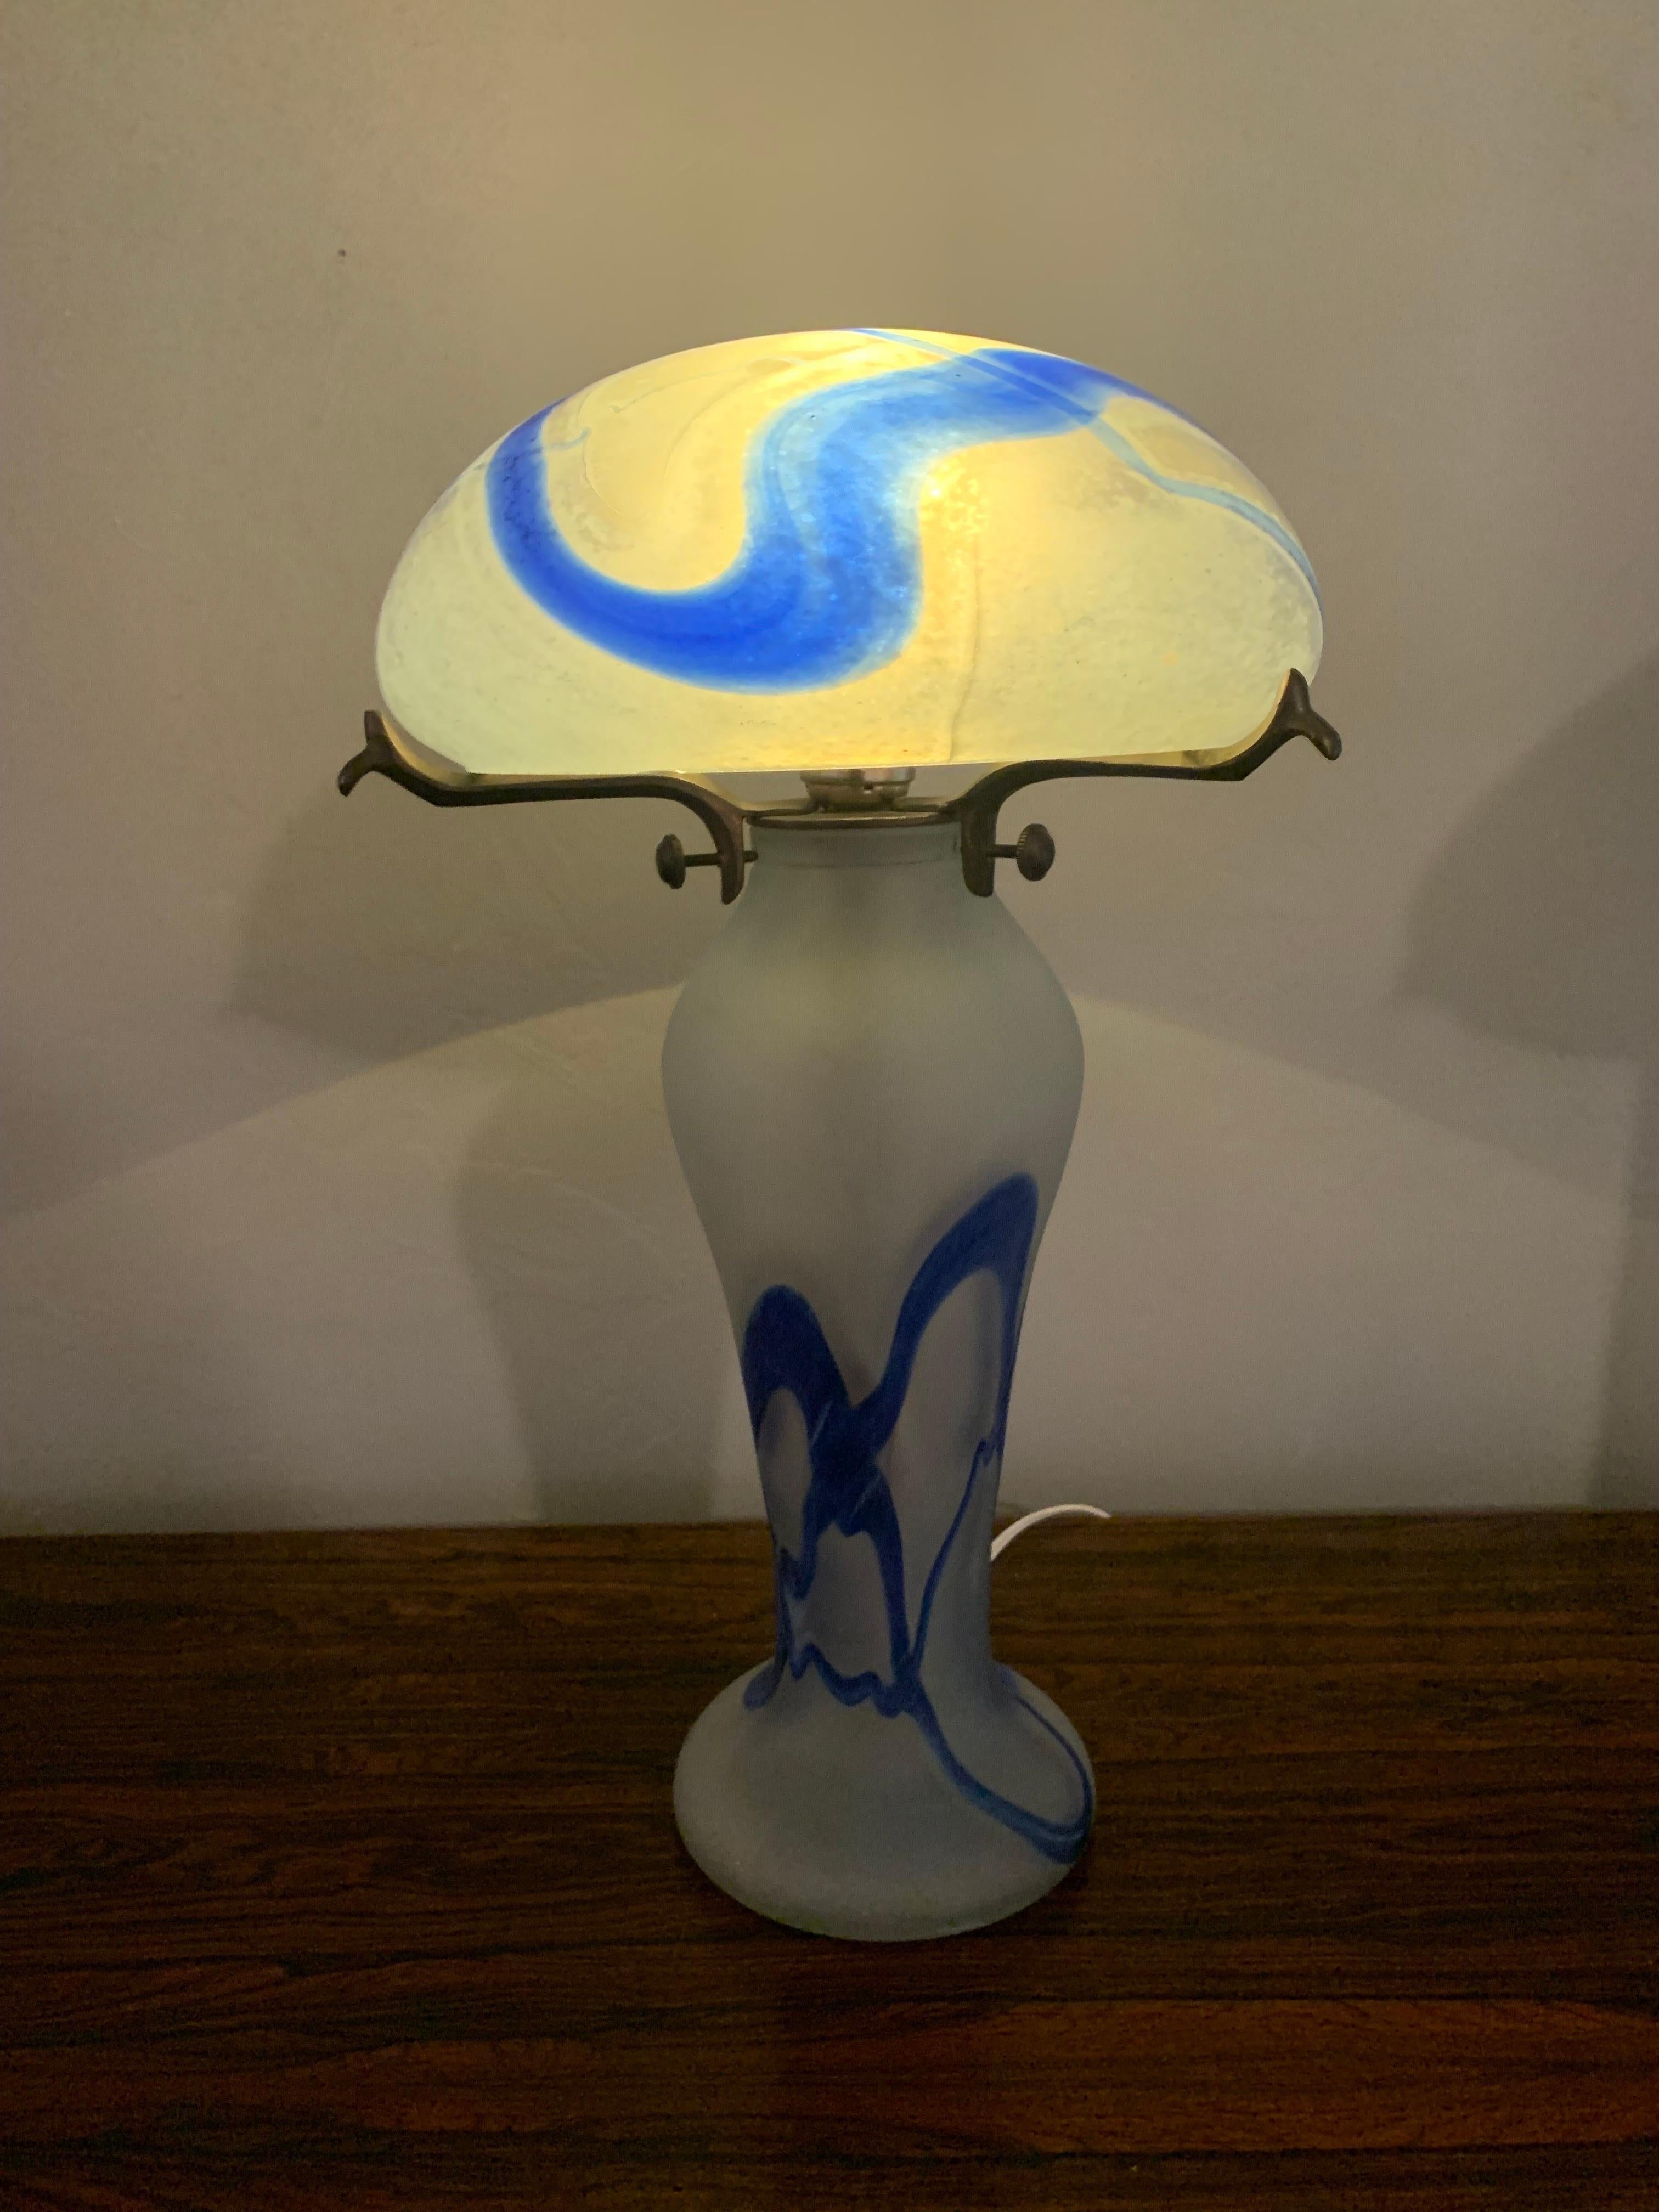 Antique French Art Nouveau Period Glass Lamp in Blue and White In Good Condition For Sale In Boynton Beach, FL